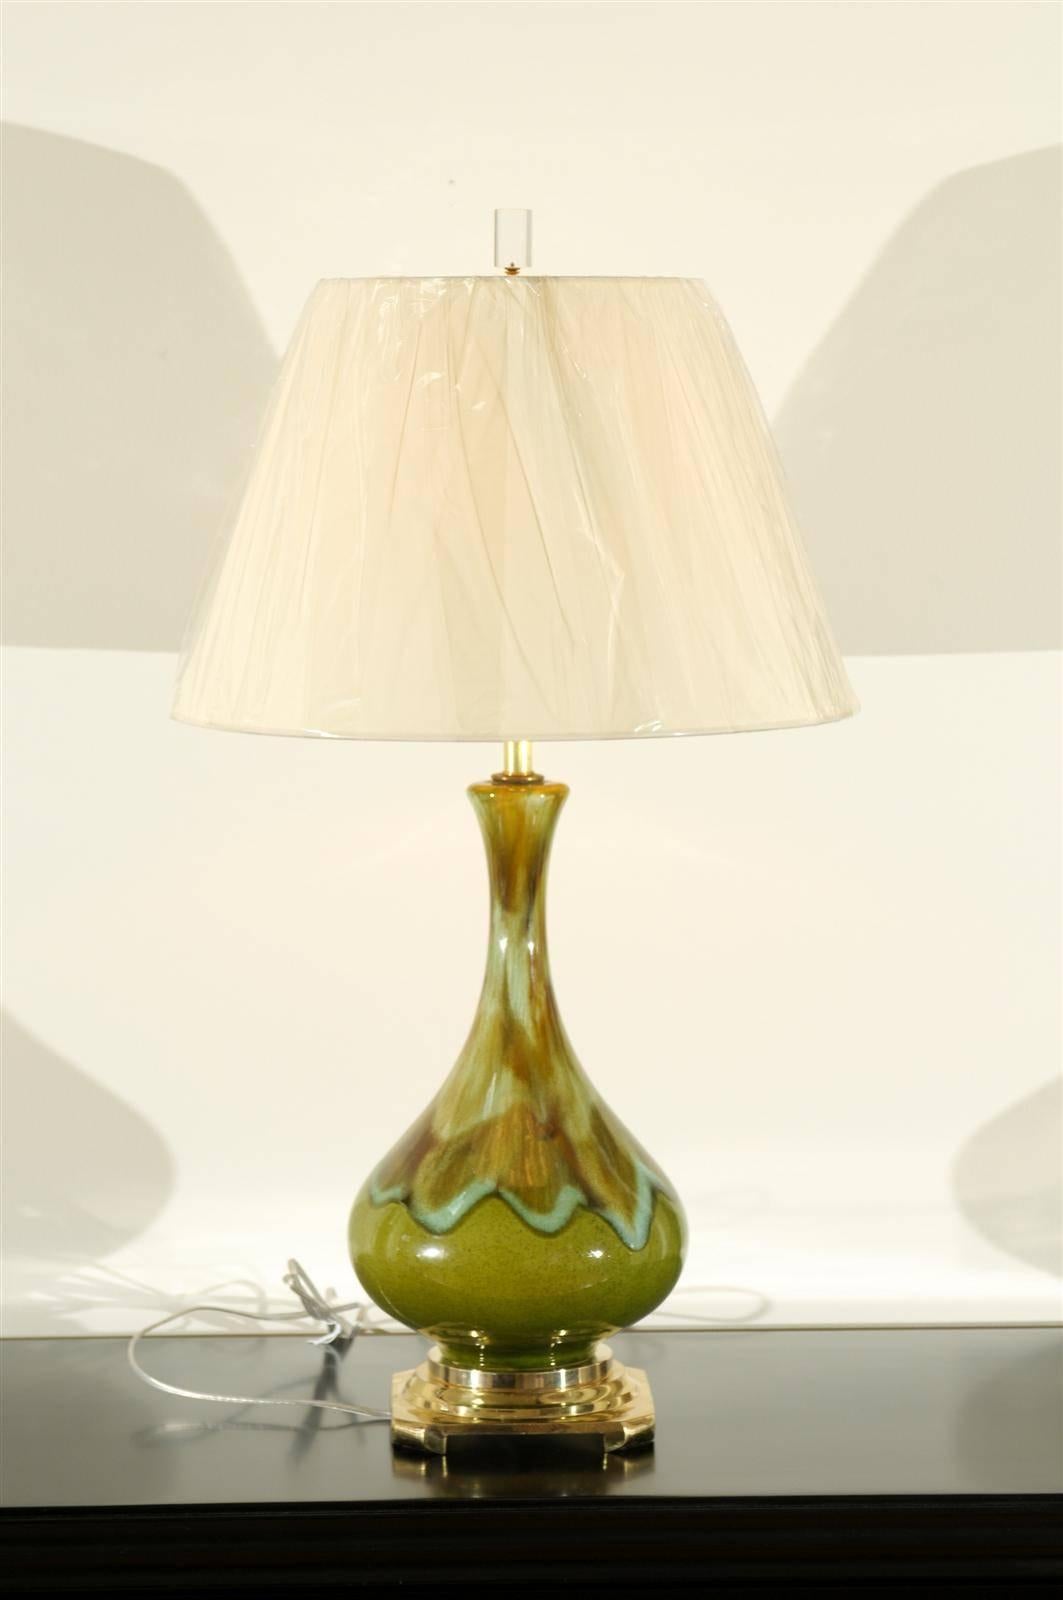 A fabulous pair of vintage ceramic lamps, circa 1970. Drip style executed in an exquisite color composition of apple green, Robins egg blue and caramel. Solid brass two step base. Stunning jewelry! Excellent restored condition. The lamps have been